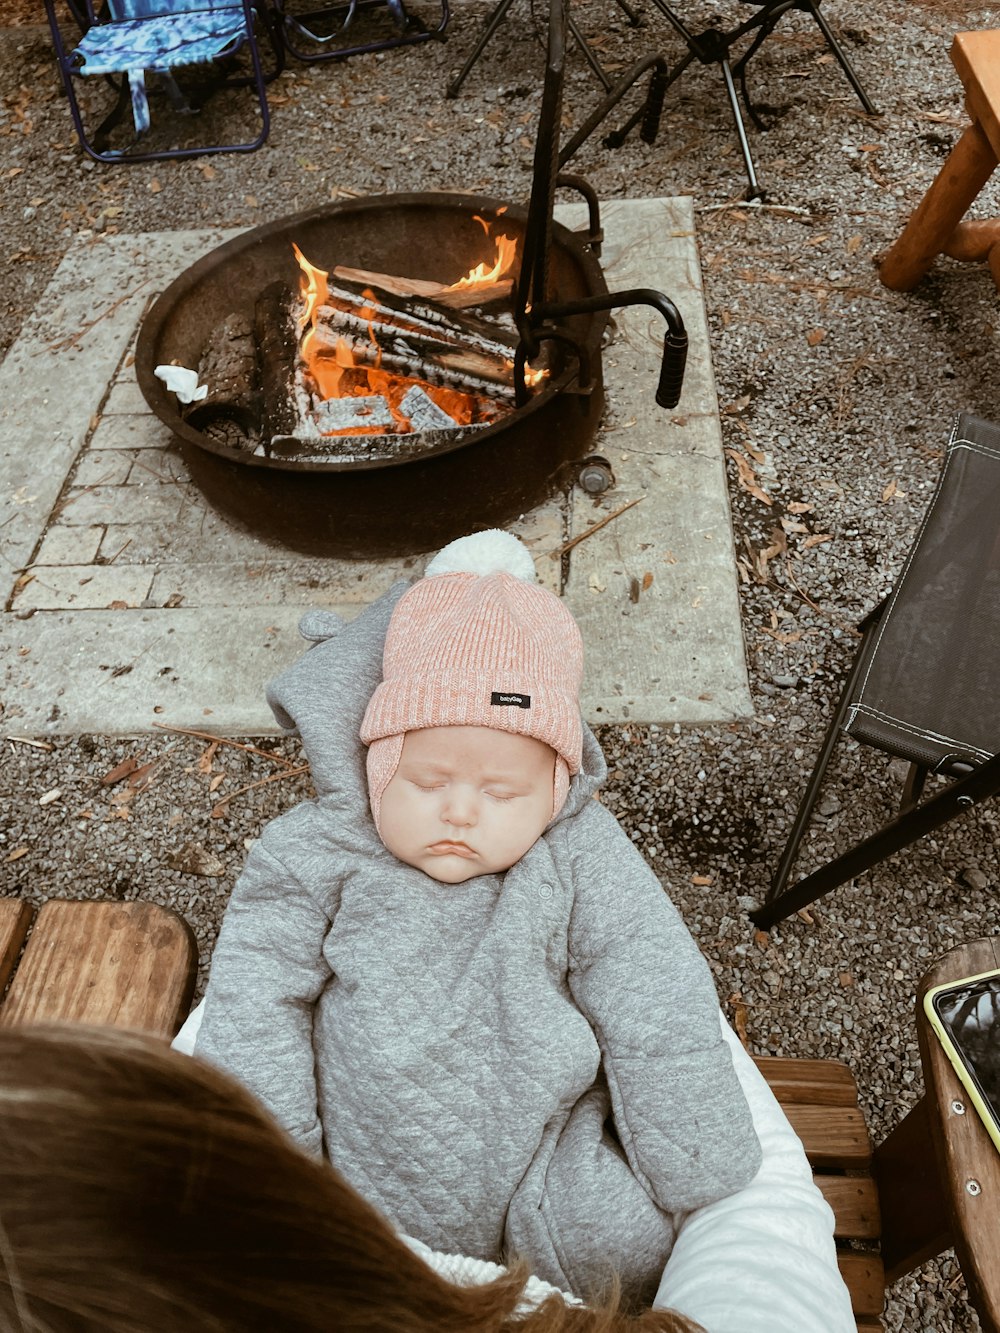 a baby wearing a pink hat sitting in front of a fire pit